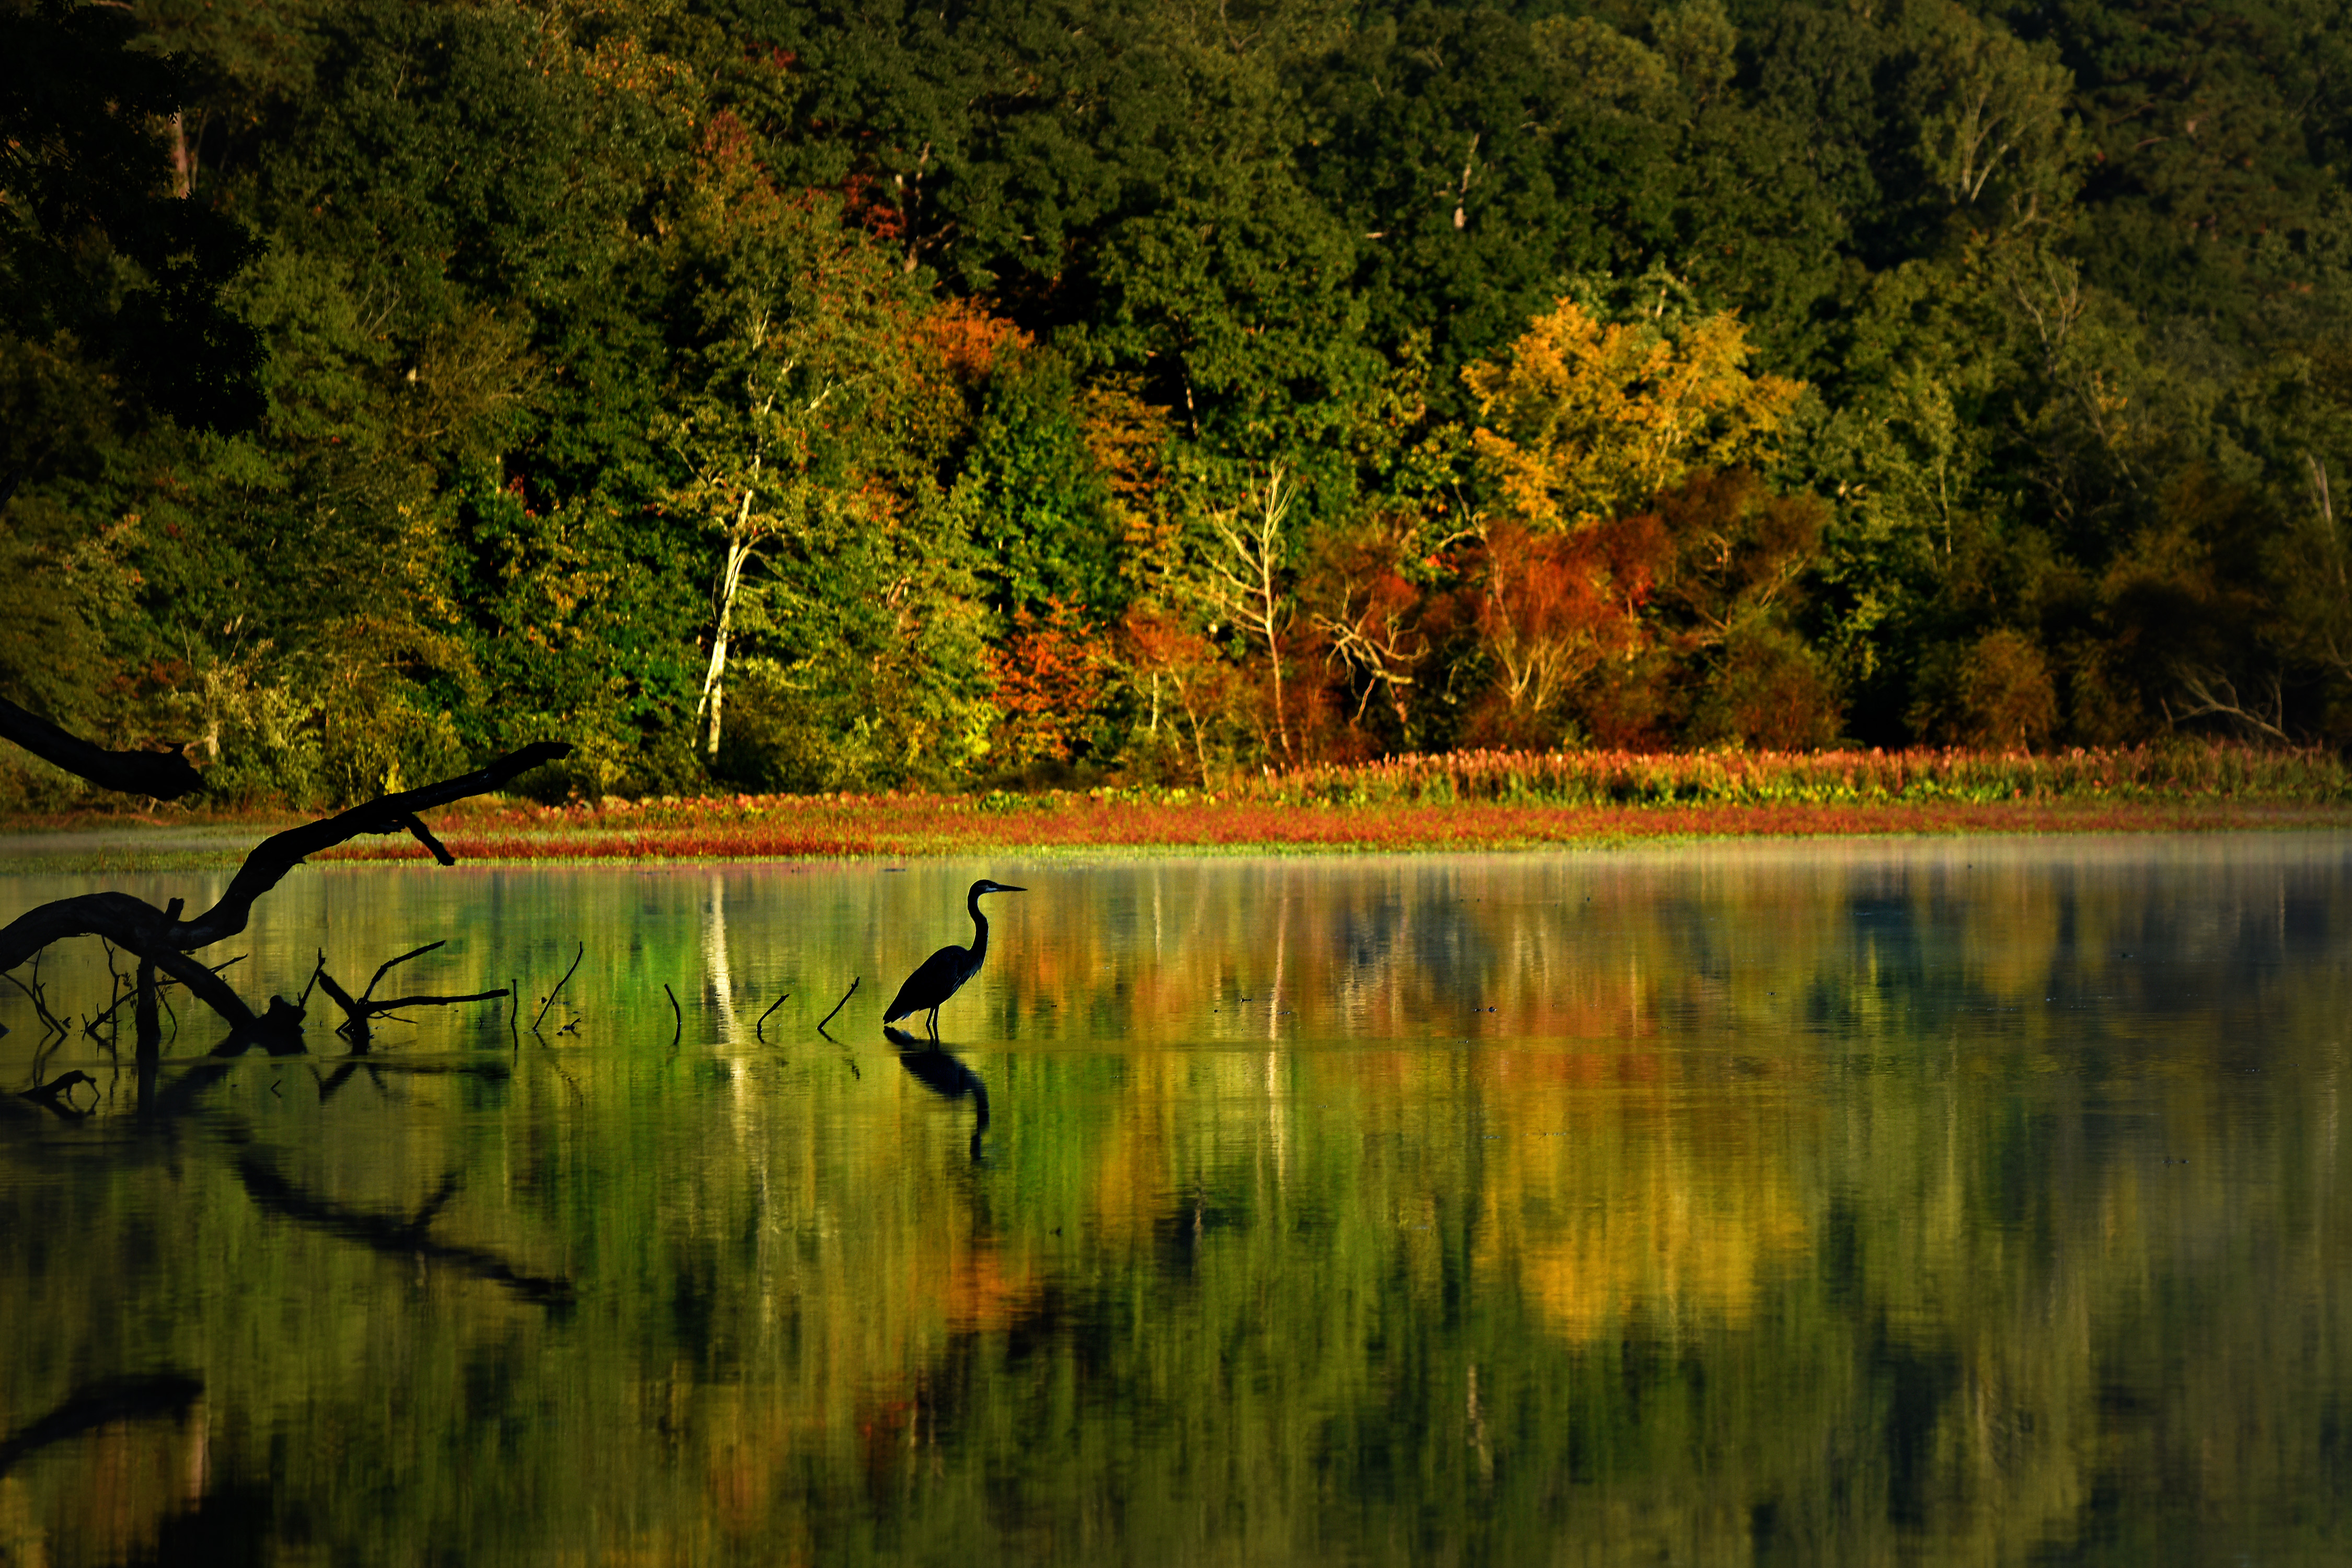 autumnal trees in green, gold, and red reflected in a lake, with the silhouette of a heron at left